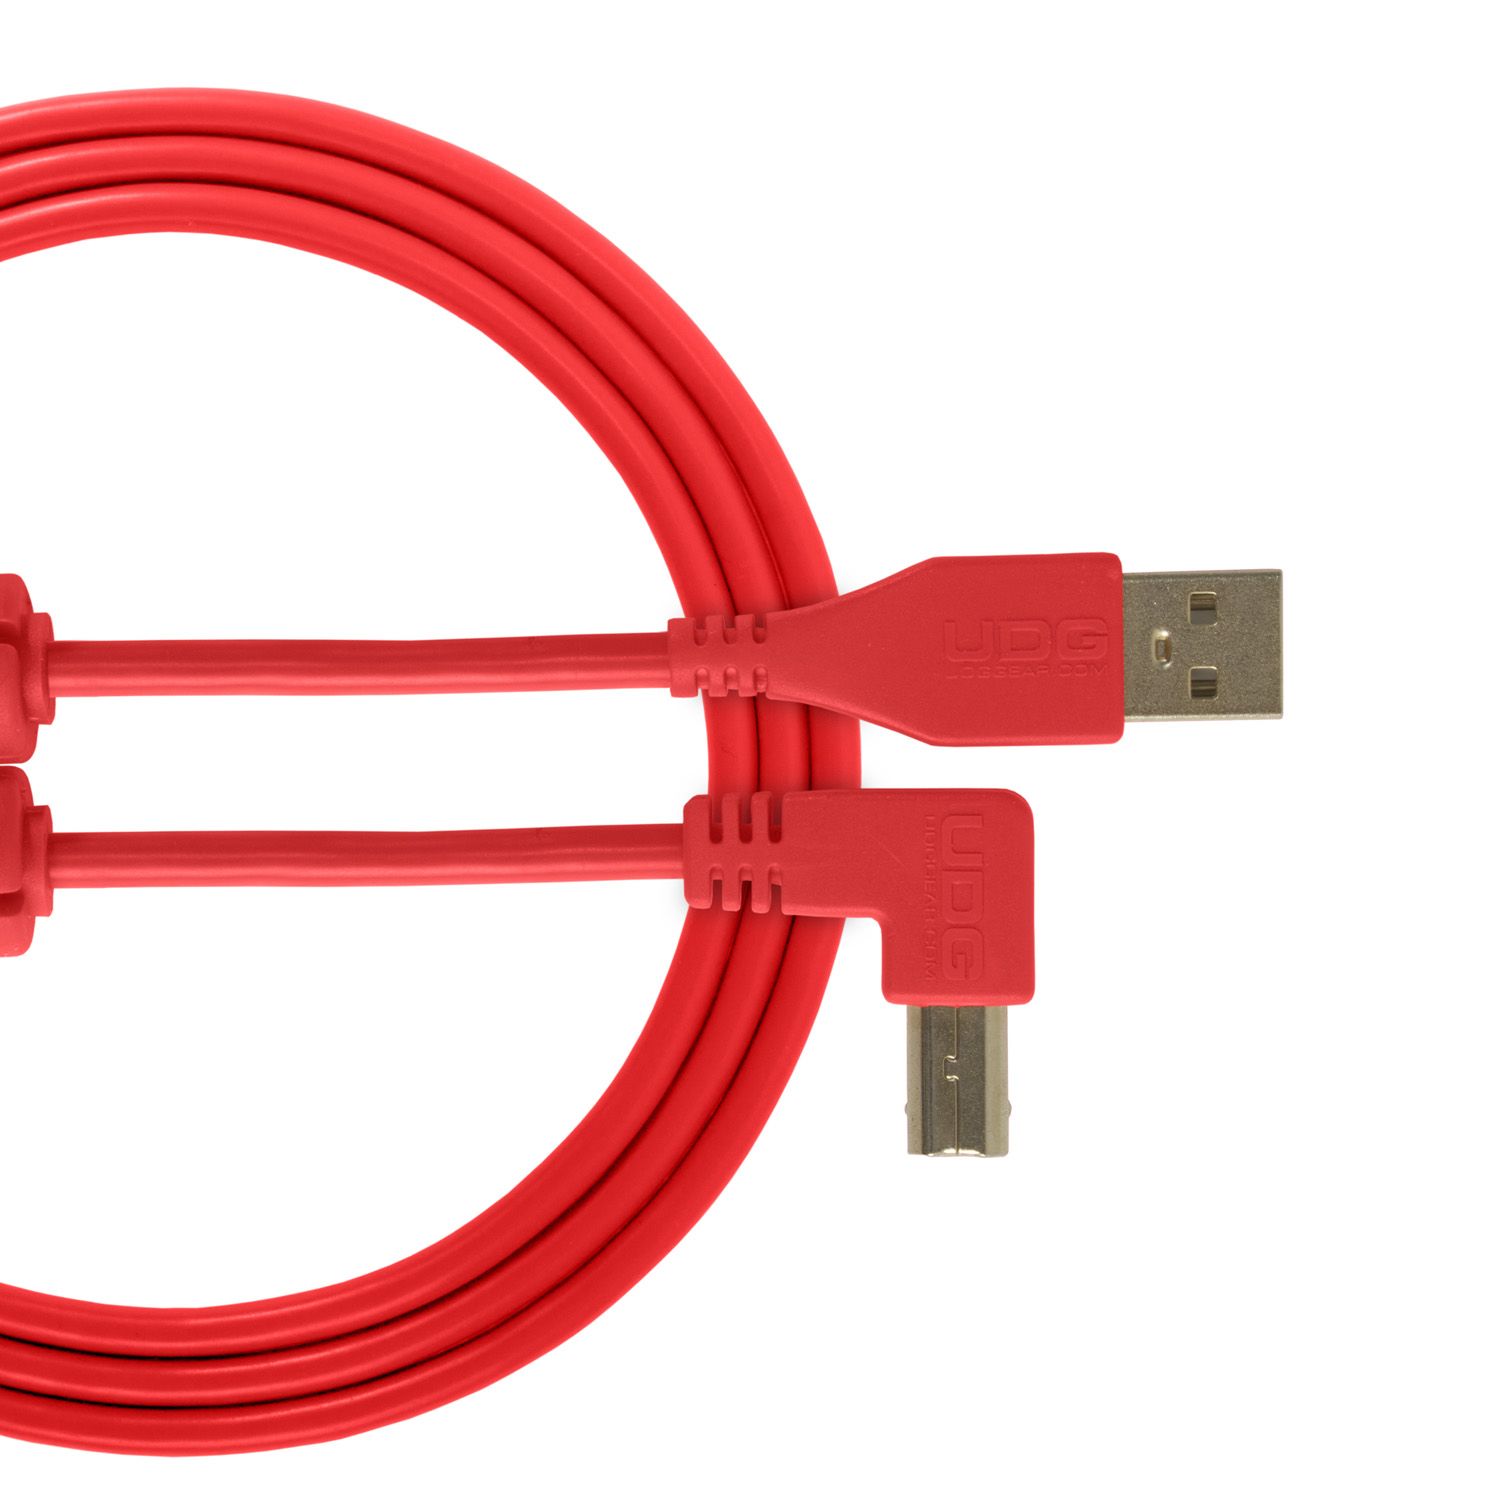 U95004RD UDG AUDIO CABLE USB 2.0 A-B RED ANGLED 1M